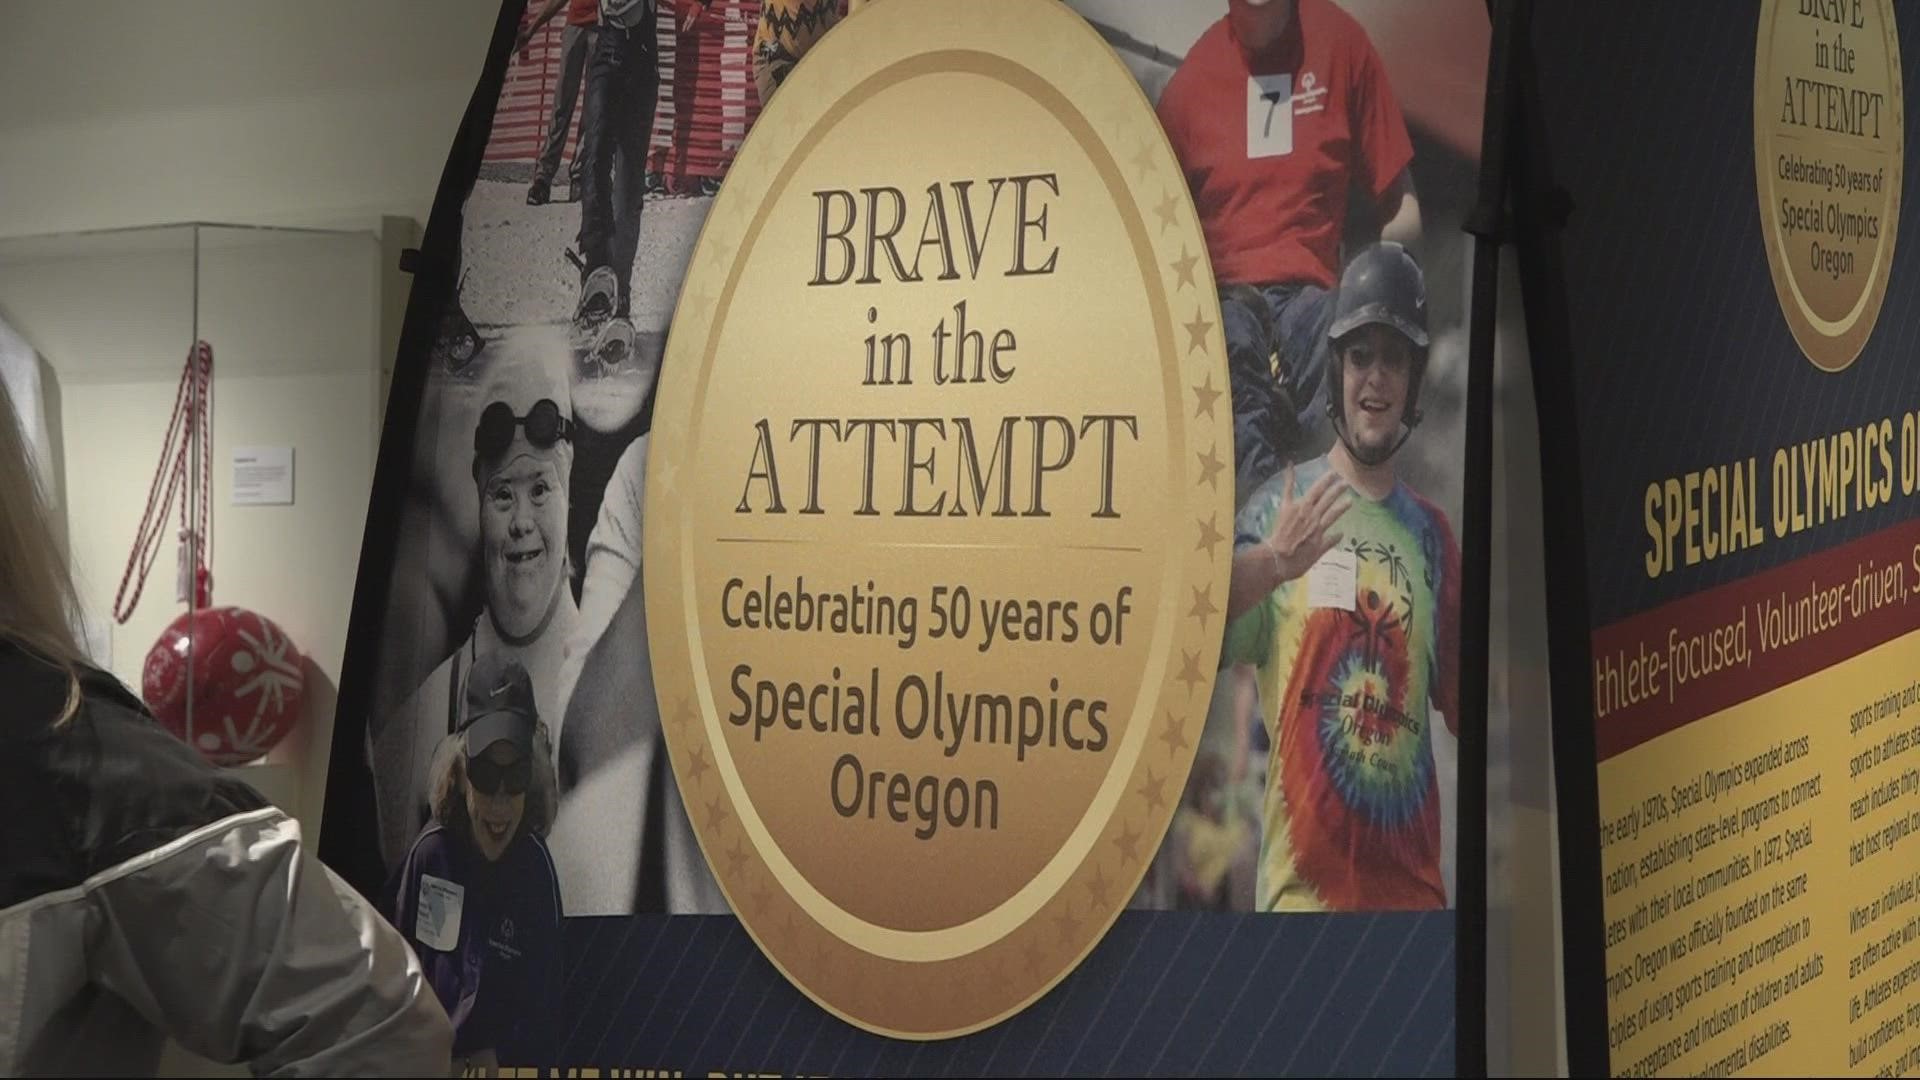 ‘Brave in the Attempt’ highlights the impact that Special Olympics Oregon has had on the community and athletes alike since 1972.